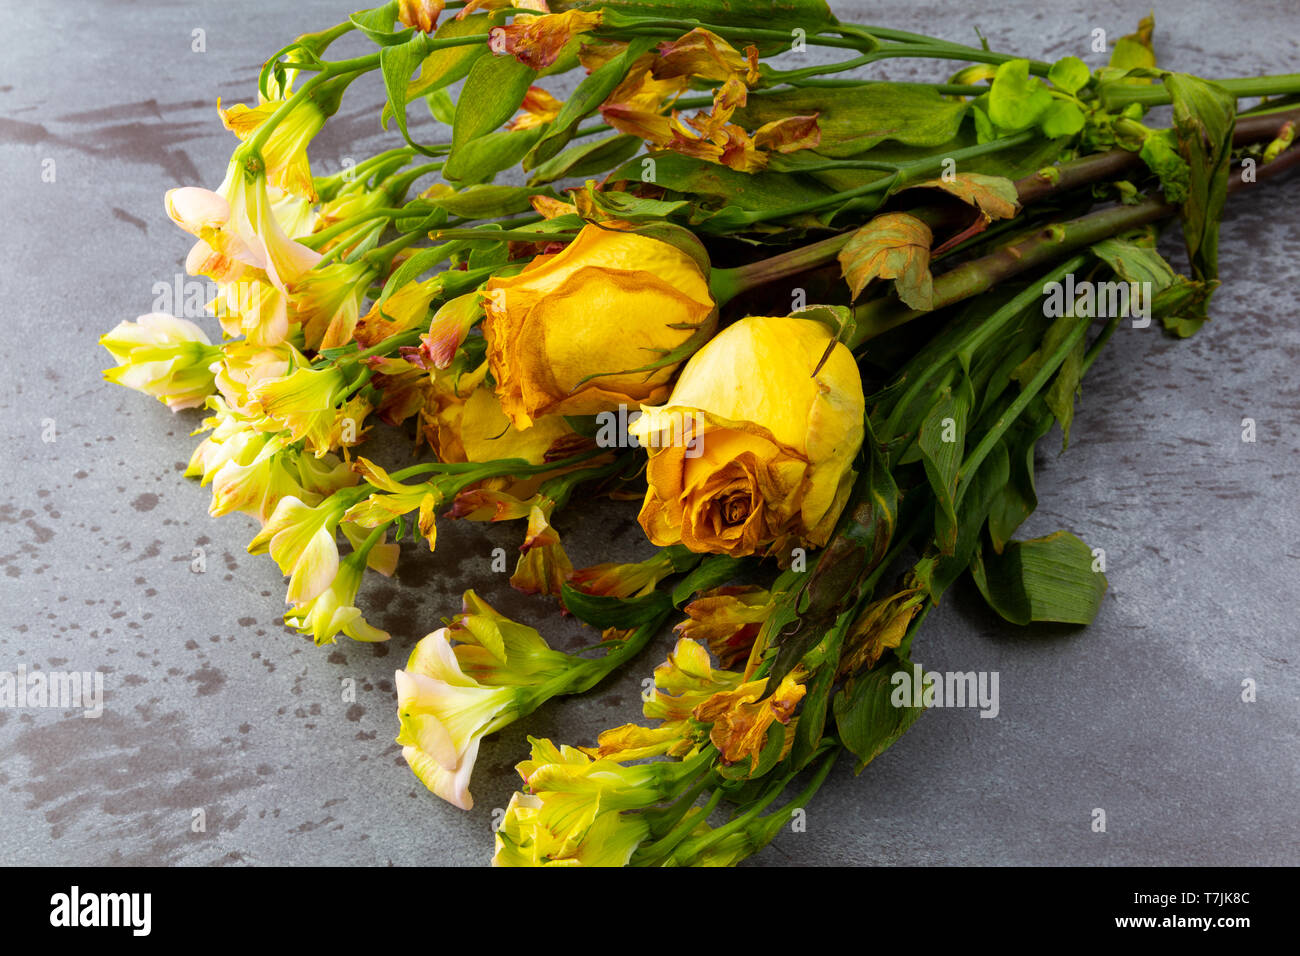 Top view of a bouquet of wilting flowers with yellow roses on a gray background illuminated with natural lighting. Stock Photo